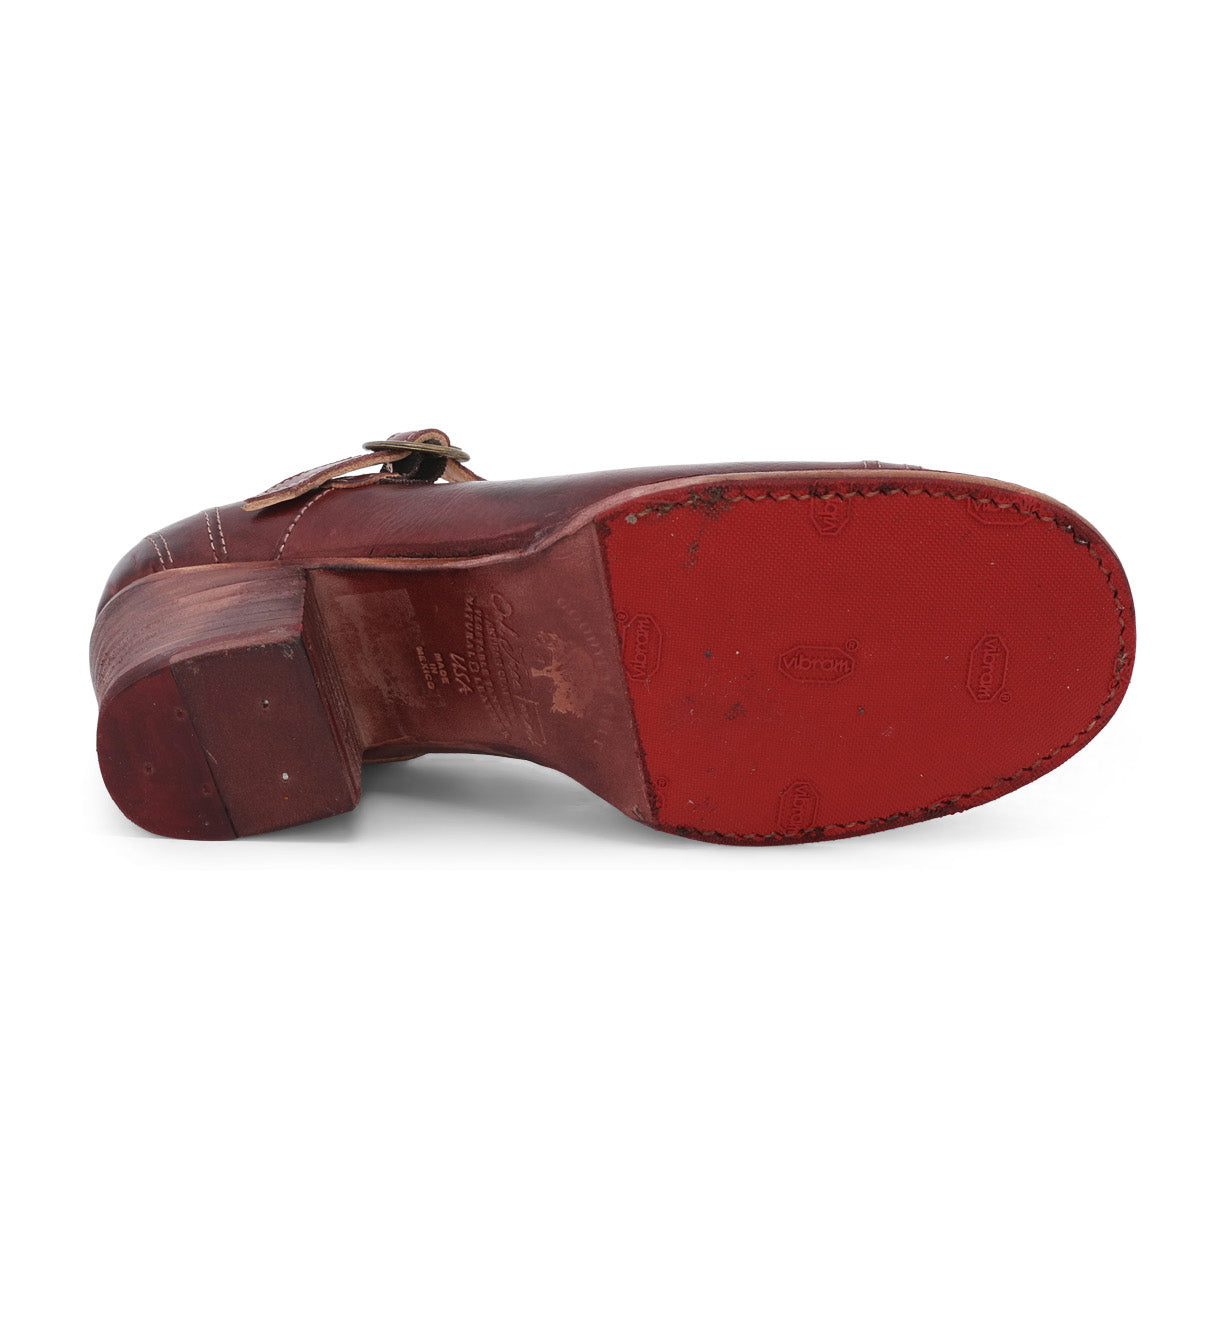 A pair of Oak Tree Farms Twigley style shoes with red soles on a white background.